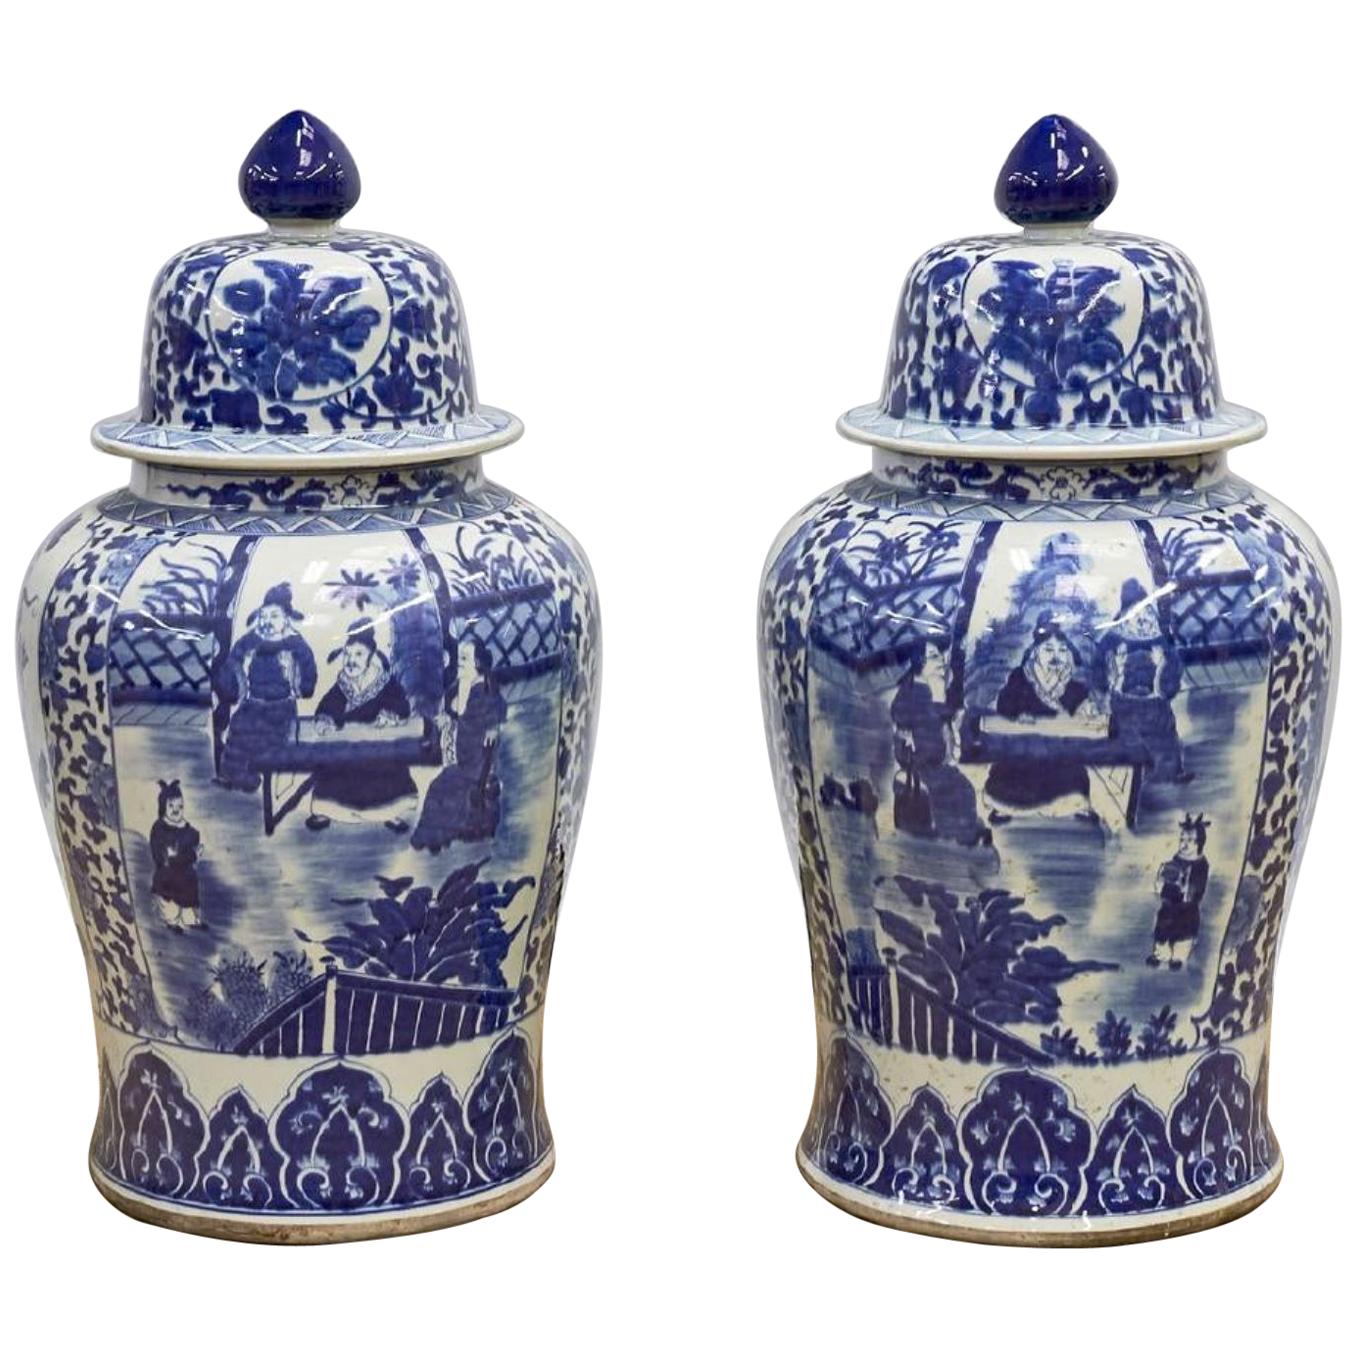 Pair of Chinese Kangxi Style Blue and White Porcelain Vases